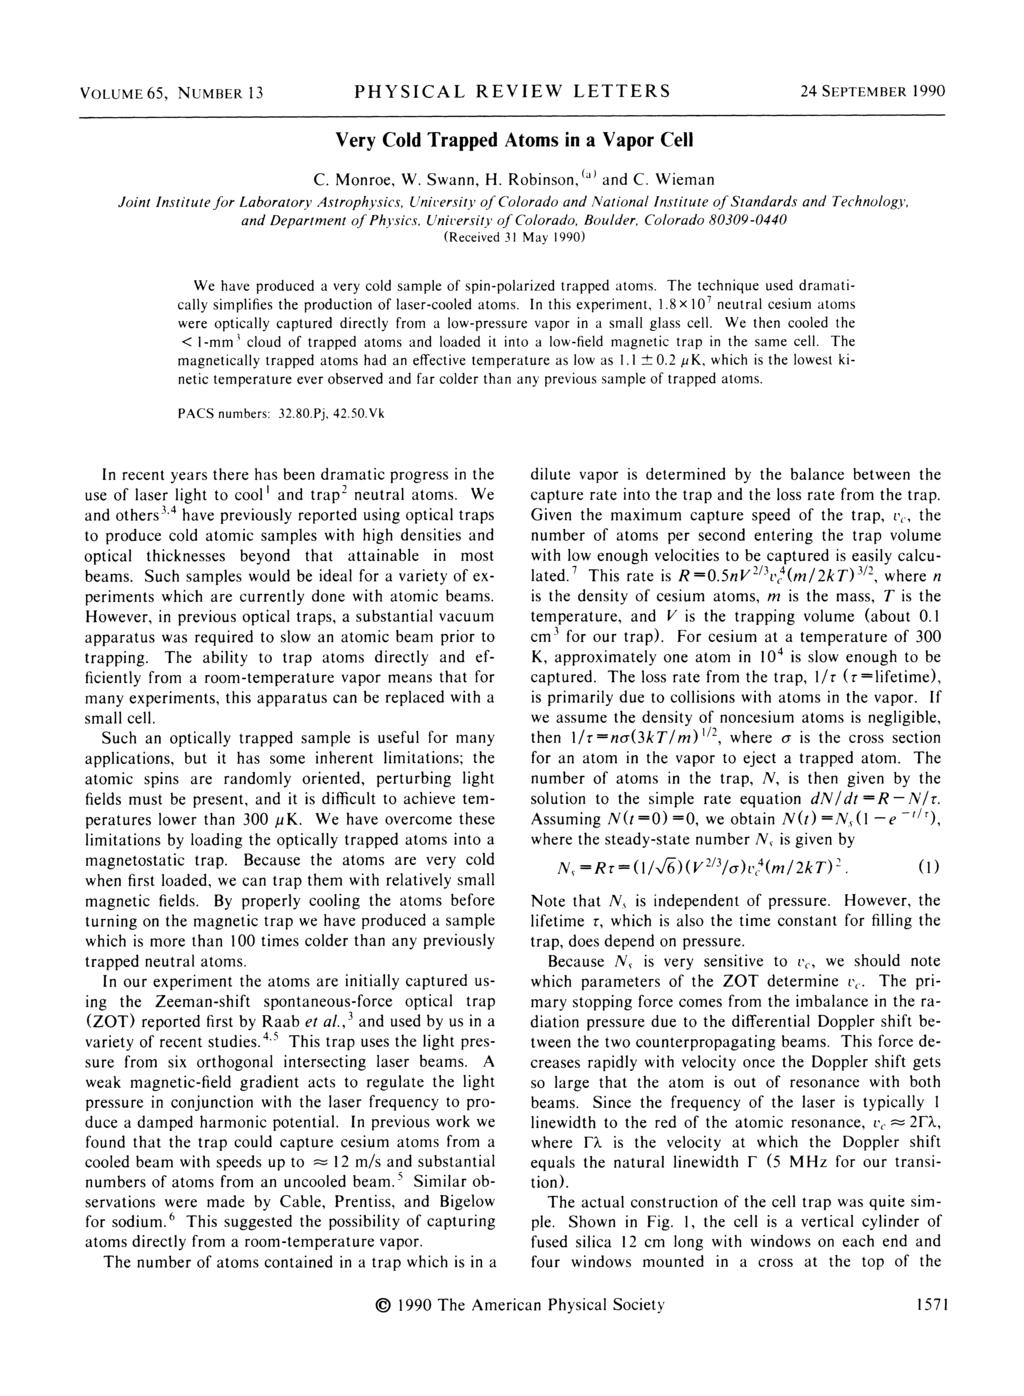 VOLUME 6S, NUMBER 13 PHYSICAL REVIEW LETTERS 24 SEPTEMBER 1990 Very Cold Trapped Atoms in a Vapor Cell " C. Monroe, %. Swann, H. Robinson, and C.